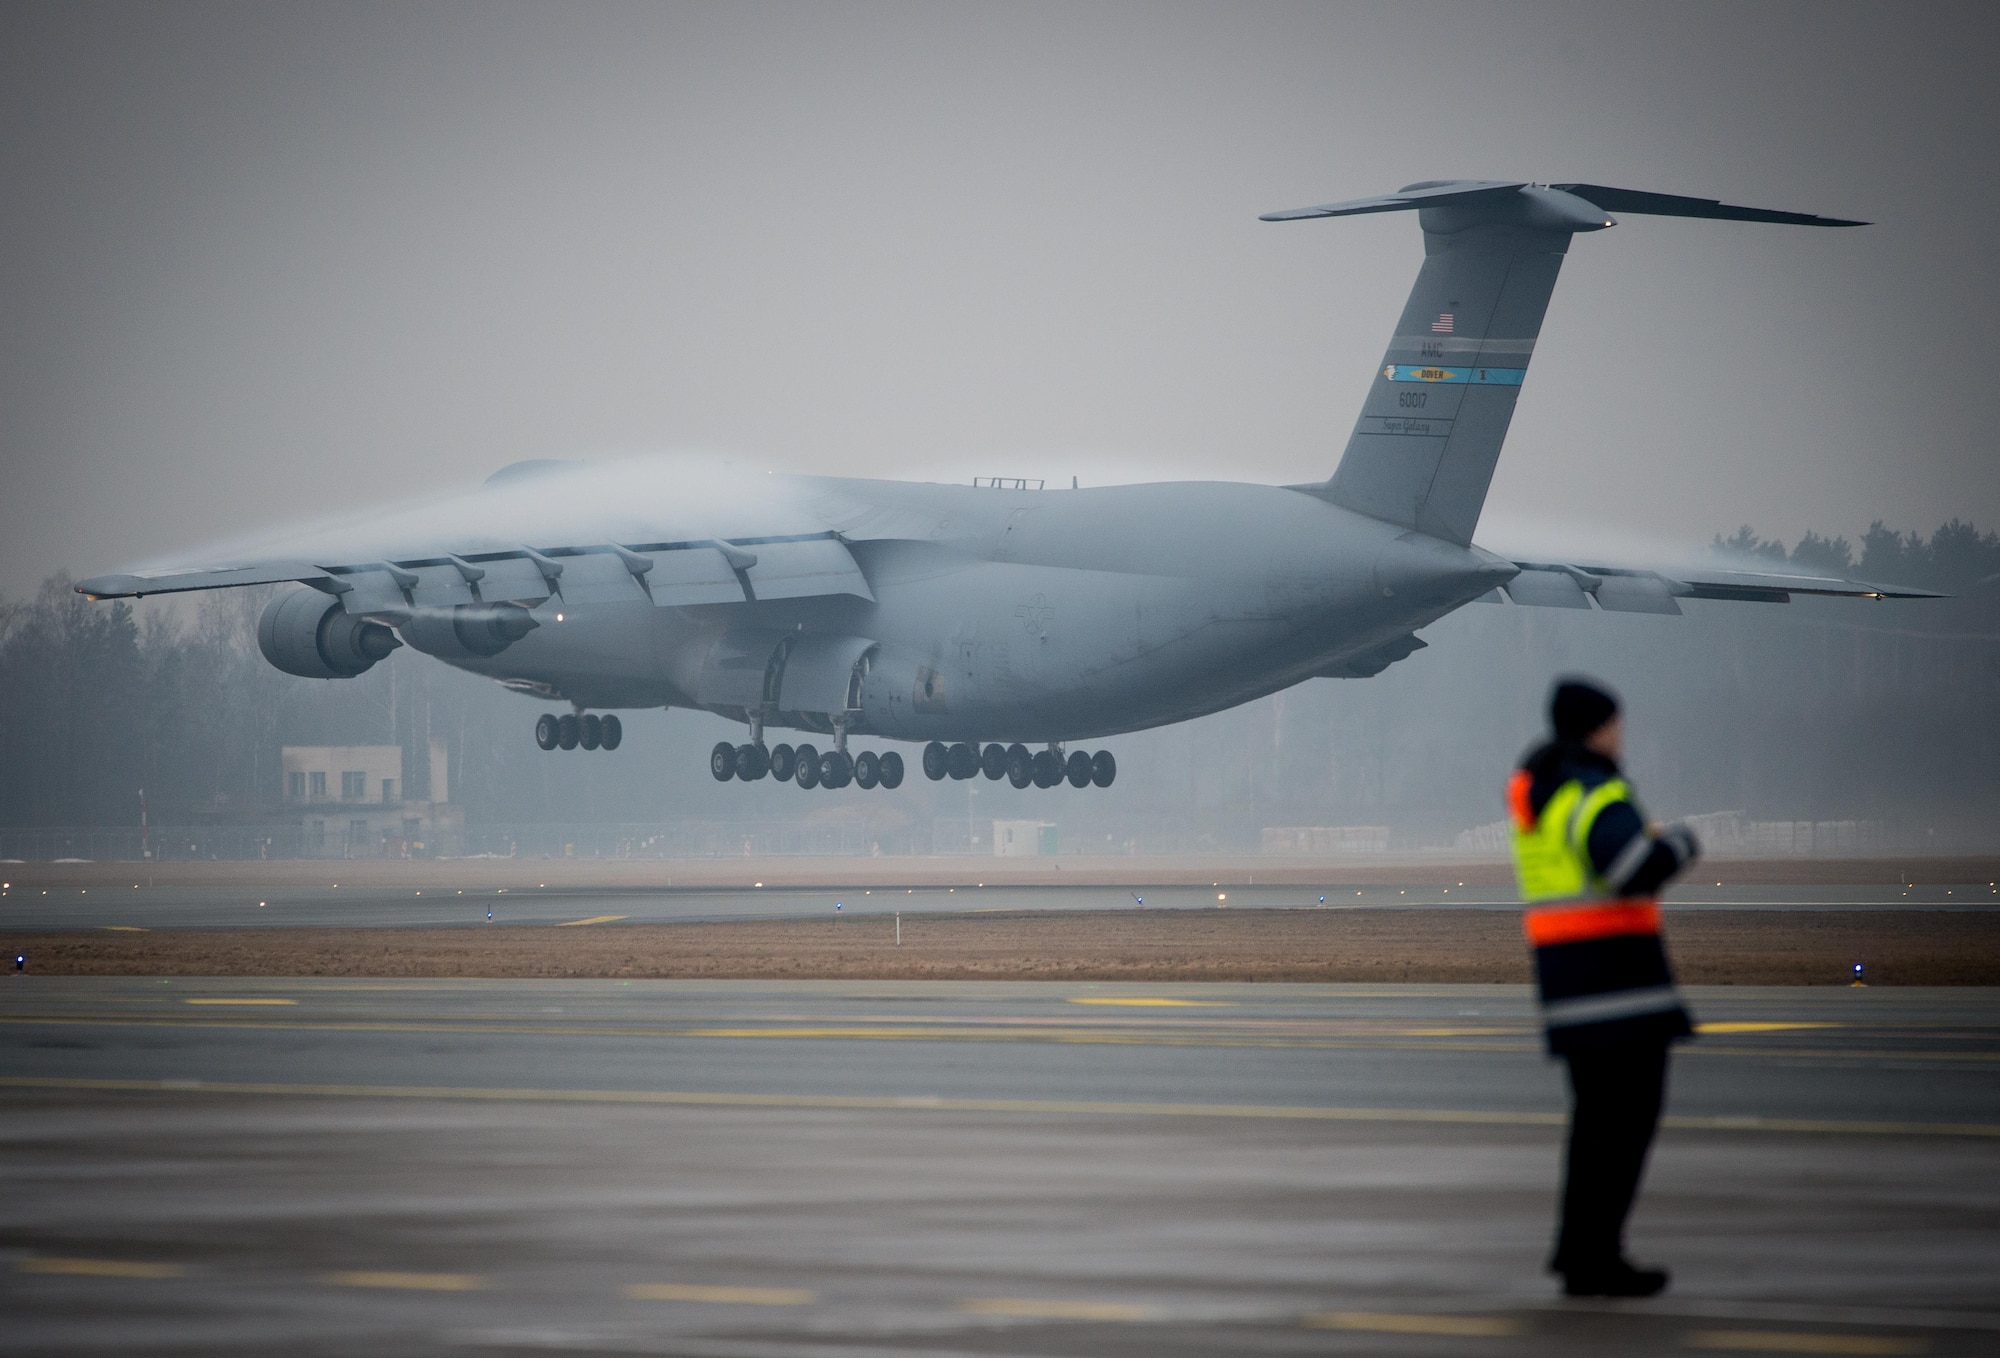 An Air Mobility Command C-5M Super Galaxy lands at Riga International Airport, Latvia, Mar. 1, 2017, to deliver UH-60 Black Hawk helicopters for the U.S. Army in support of Operation Atlantic Resolve. Five Black Hawk helicopters will be deployed to Latvia as part of a larger contingent of helicopters and personnel deployed to support Operation Atlantic Resolve, a U.S. commitment to maintaining peace and stability in the European region. (U.S. Air Force photo/Tech. Sgt. Ryan Crane)